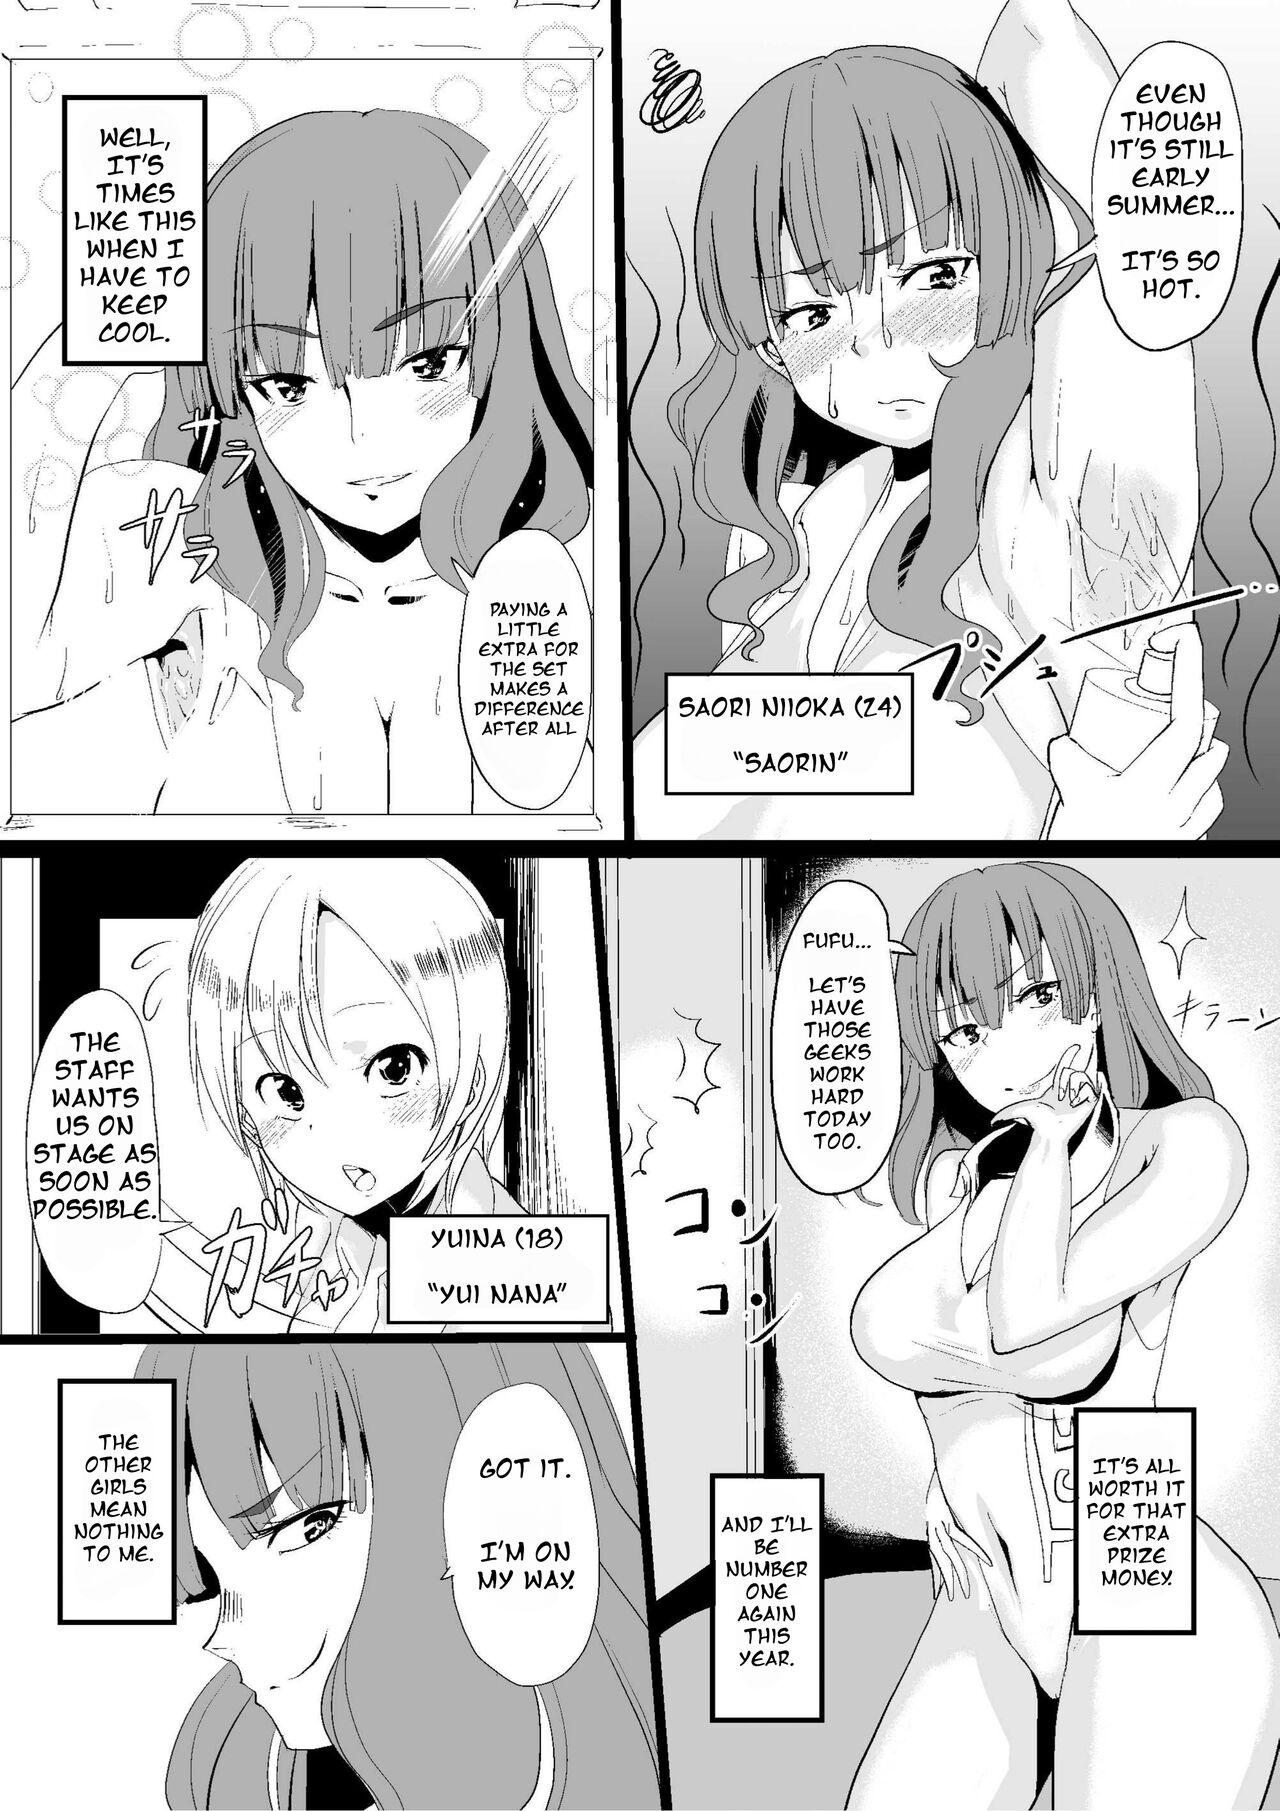 Awesome Onna no Kokoro o Ossanka Suru Camera | Changing a Woman's Heart to an Old Man's With a Camera - Original Hot Wife - Picture 3